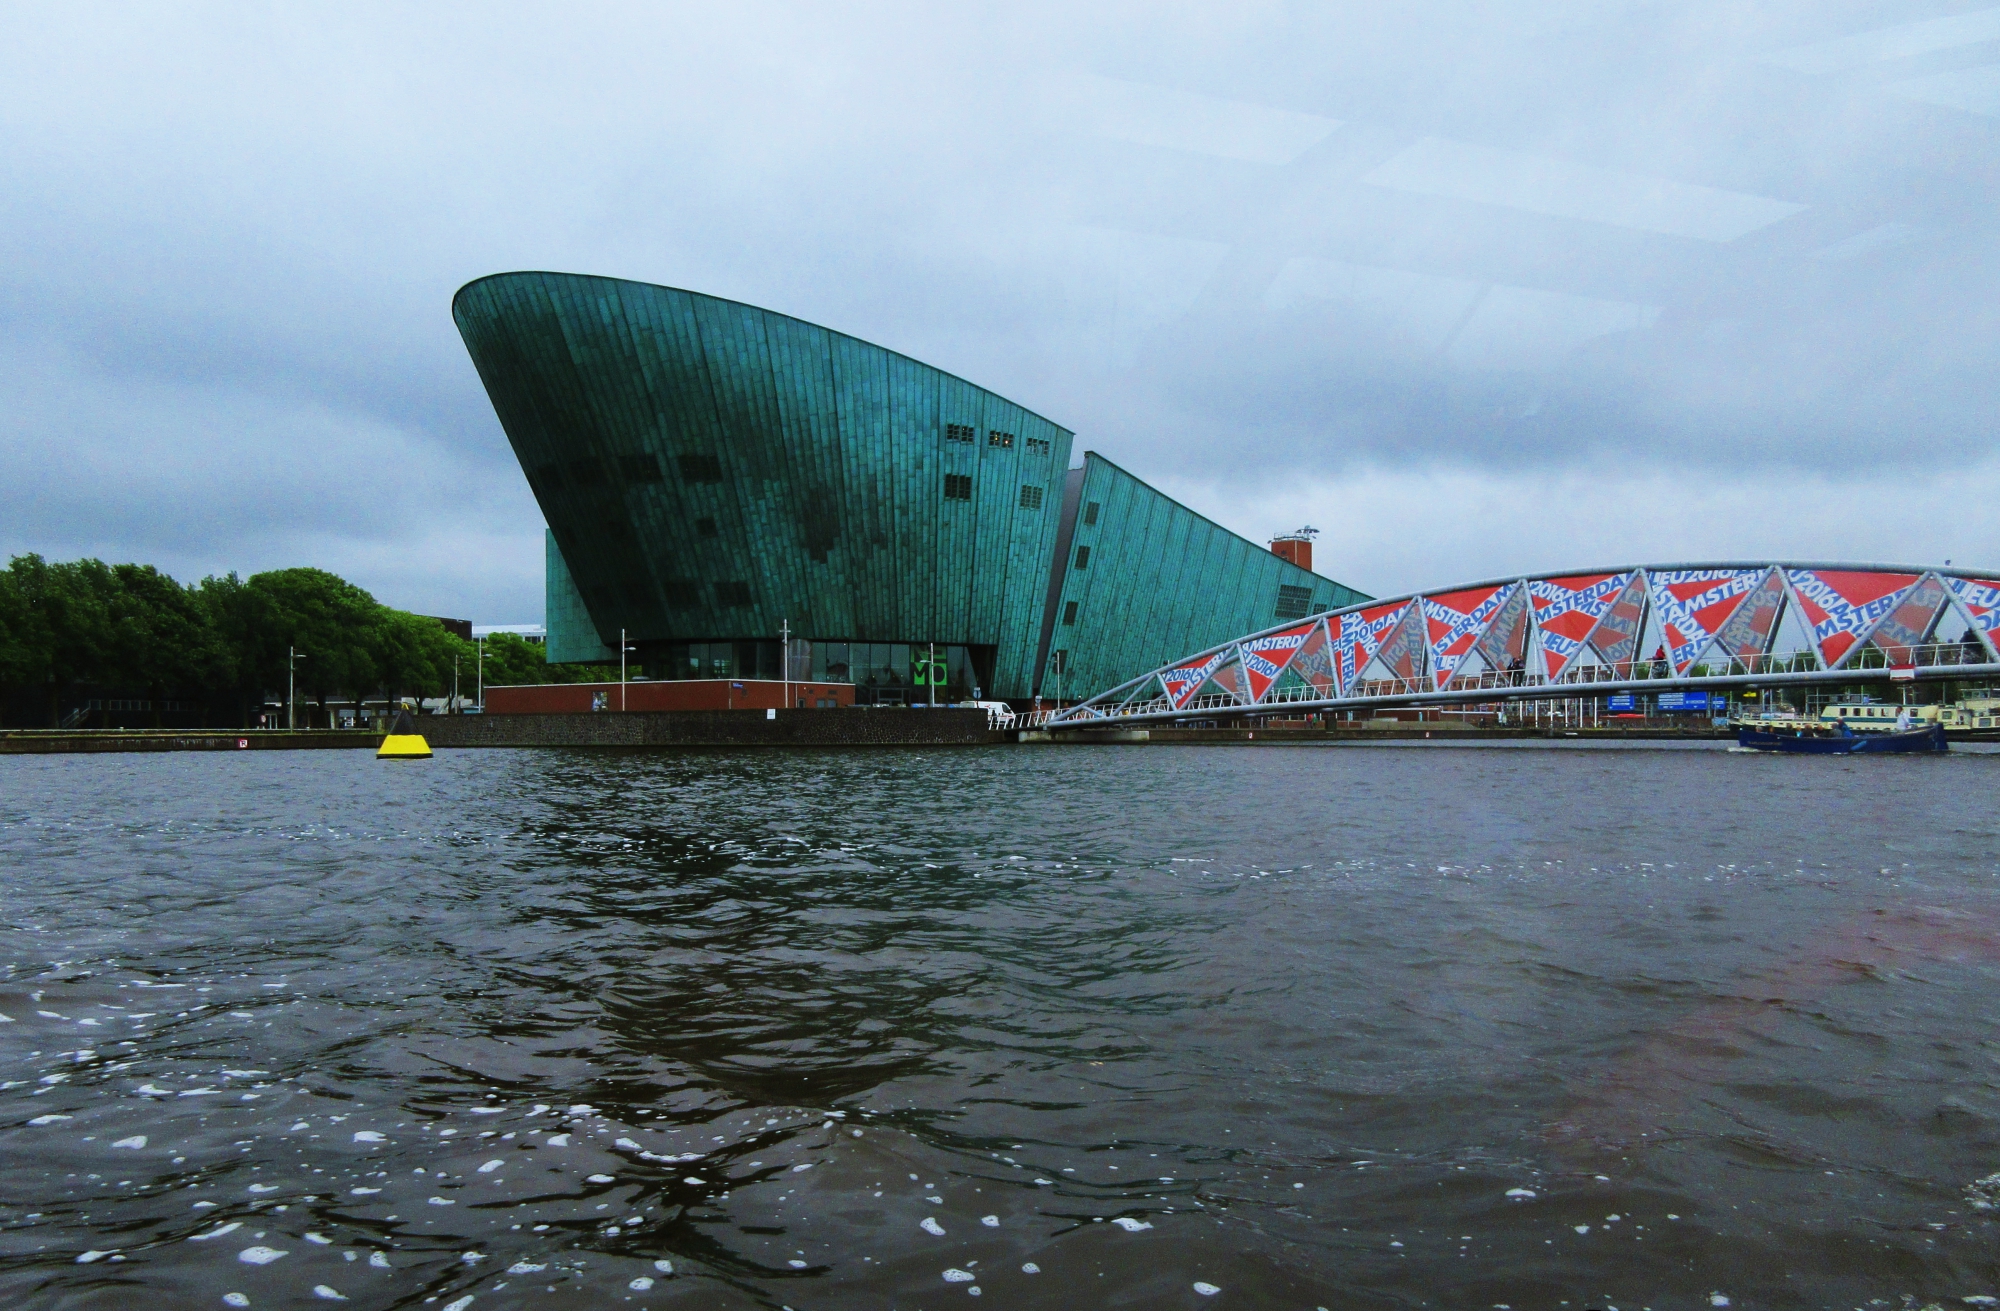 A Visit to The Nemo Science Museum in Amsterdam